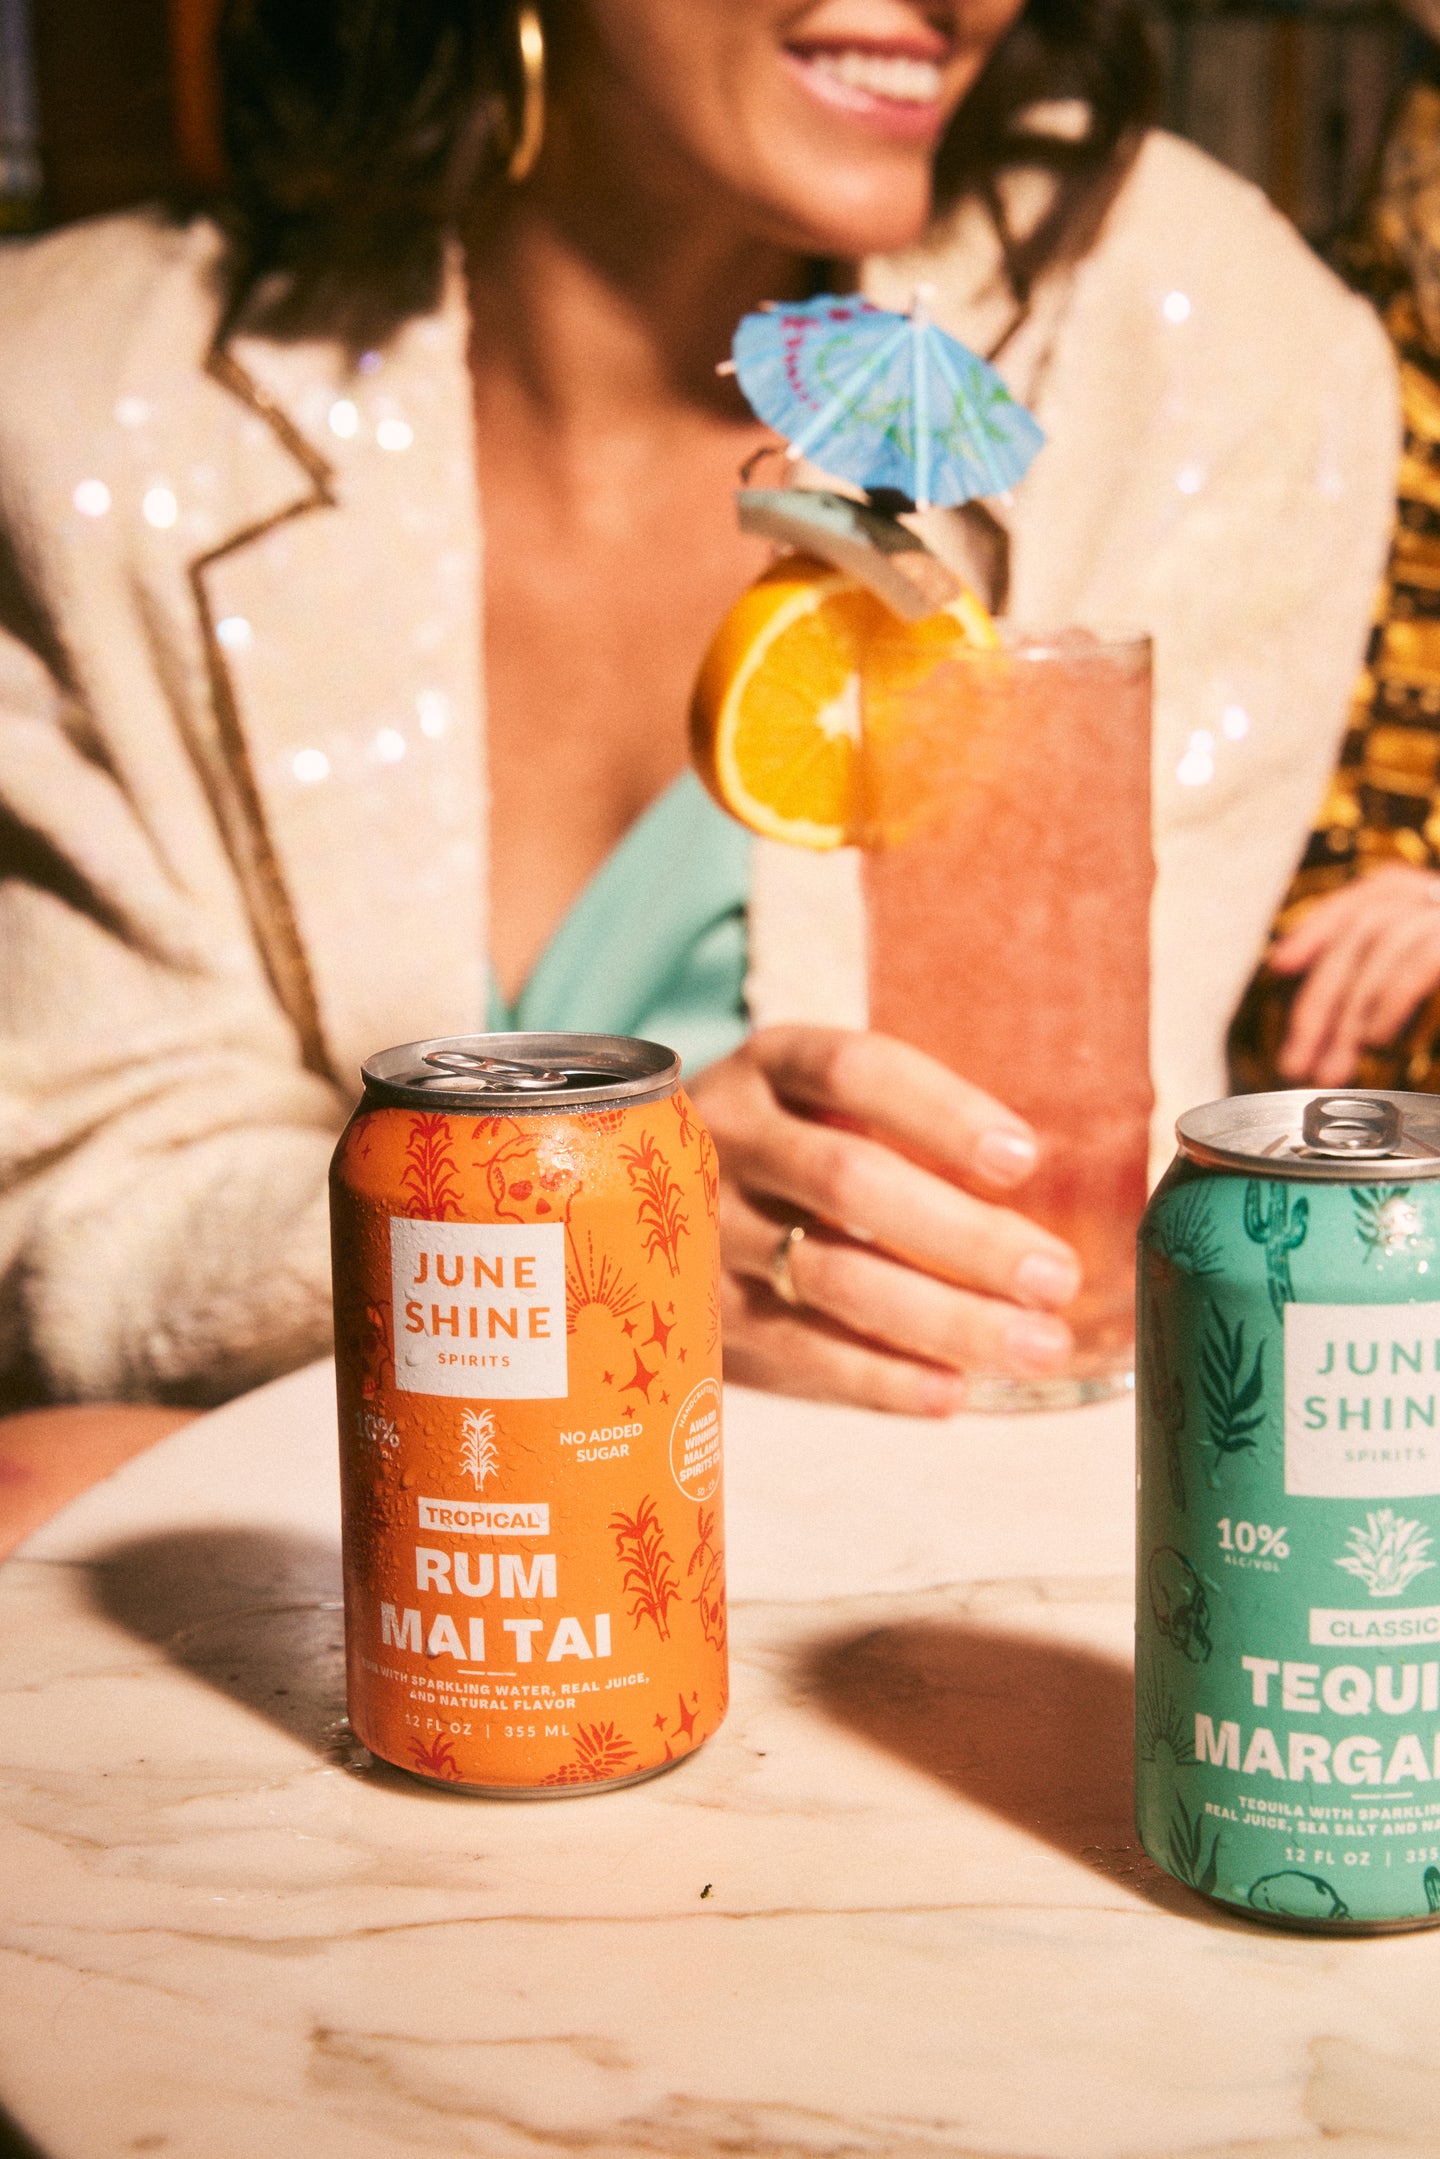 JuneShine Spirits cans on bar table with woman in the background holding a cocktail glass